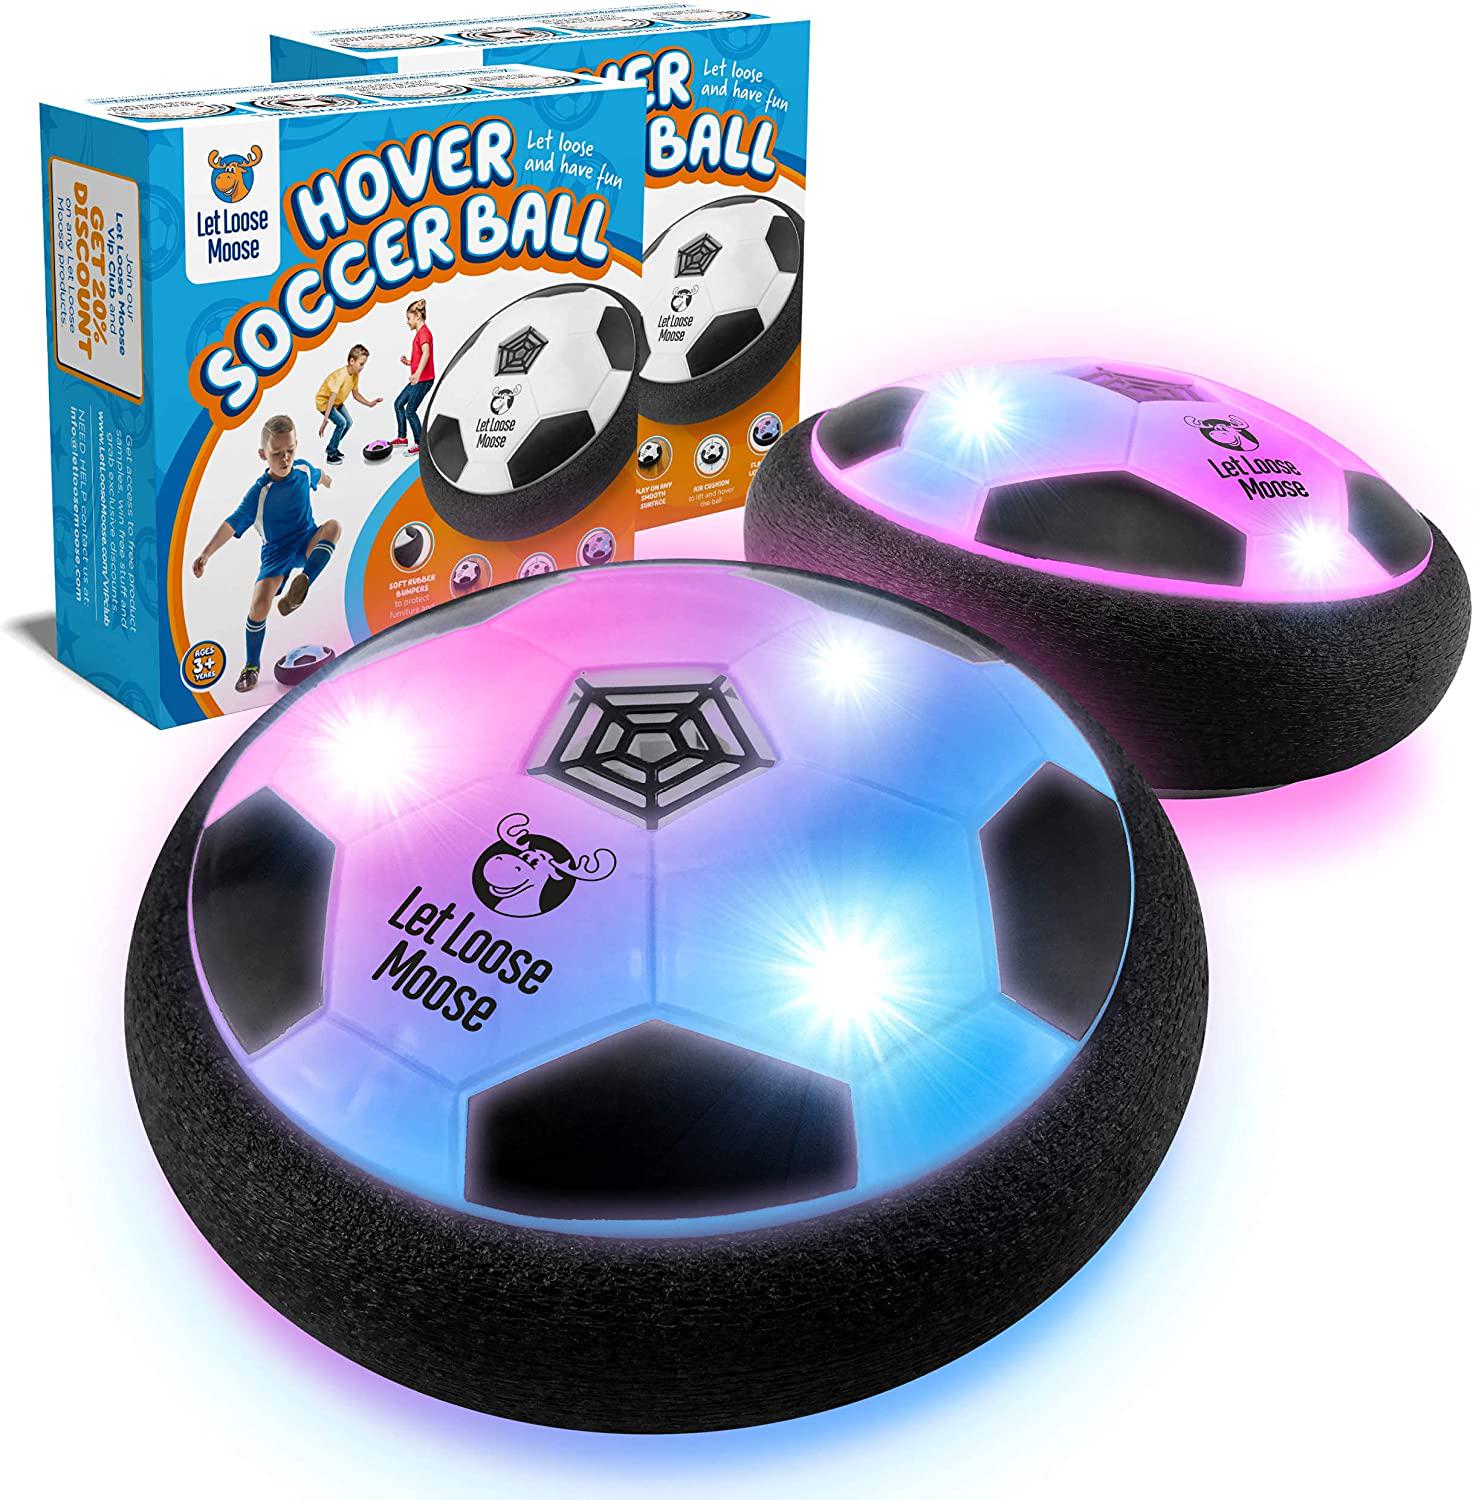 Let Loose Moose, LLMoose Hover Ball for Boys and Girls - 2 LED Light Soccer Balls with Foam Bumpers